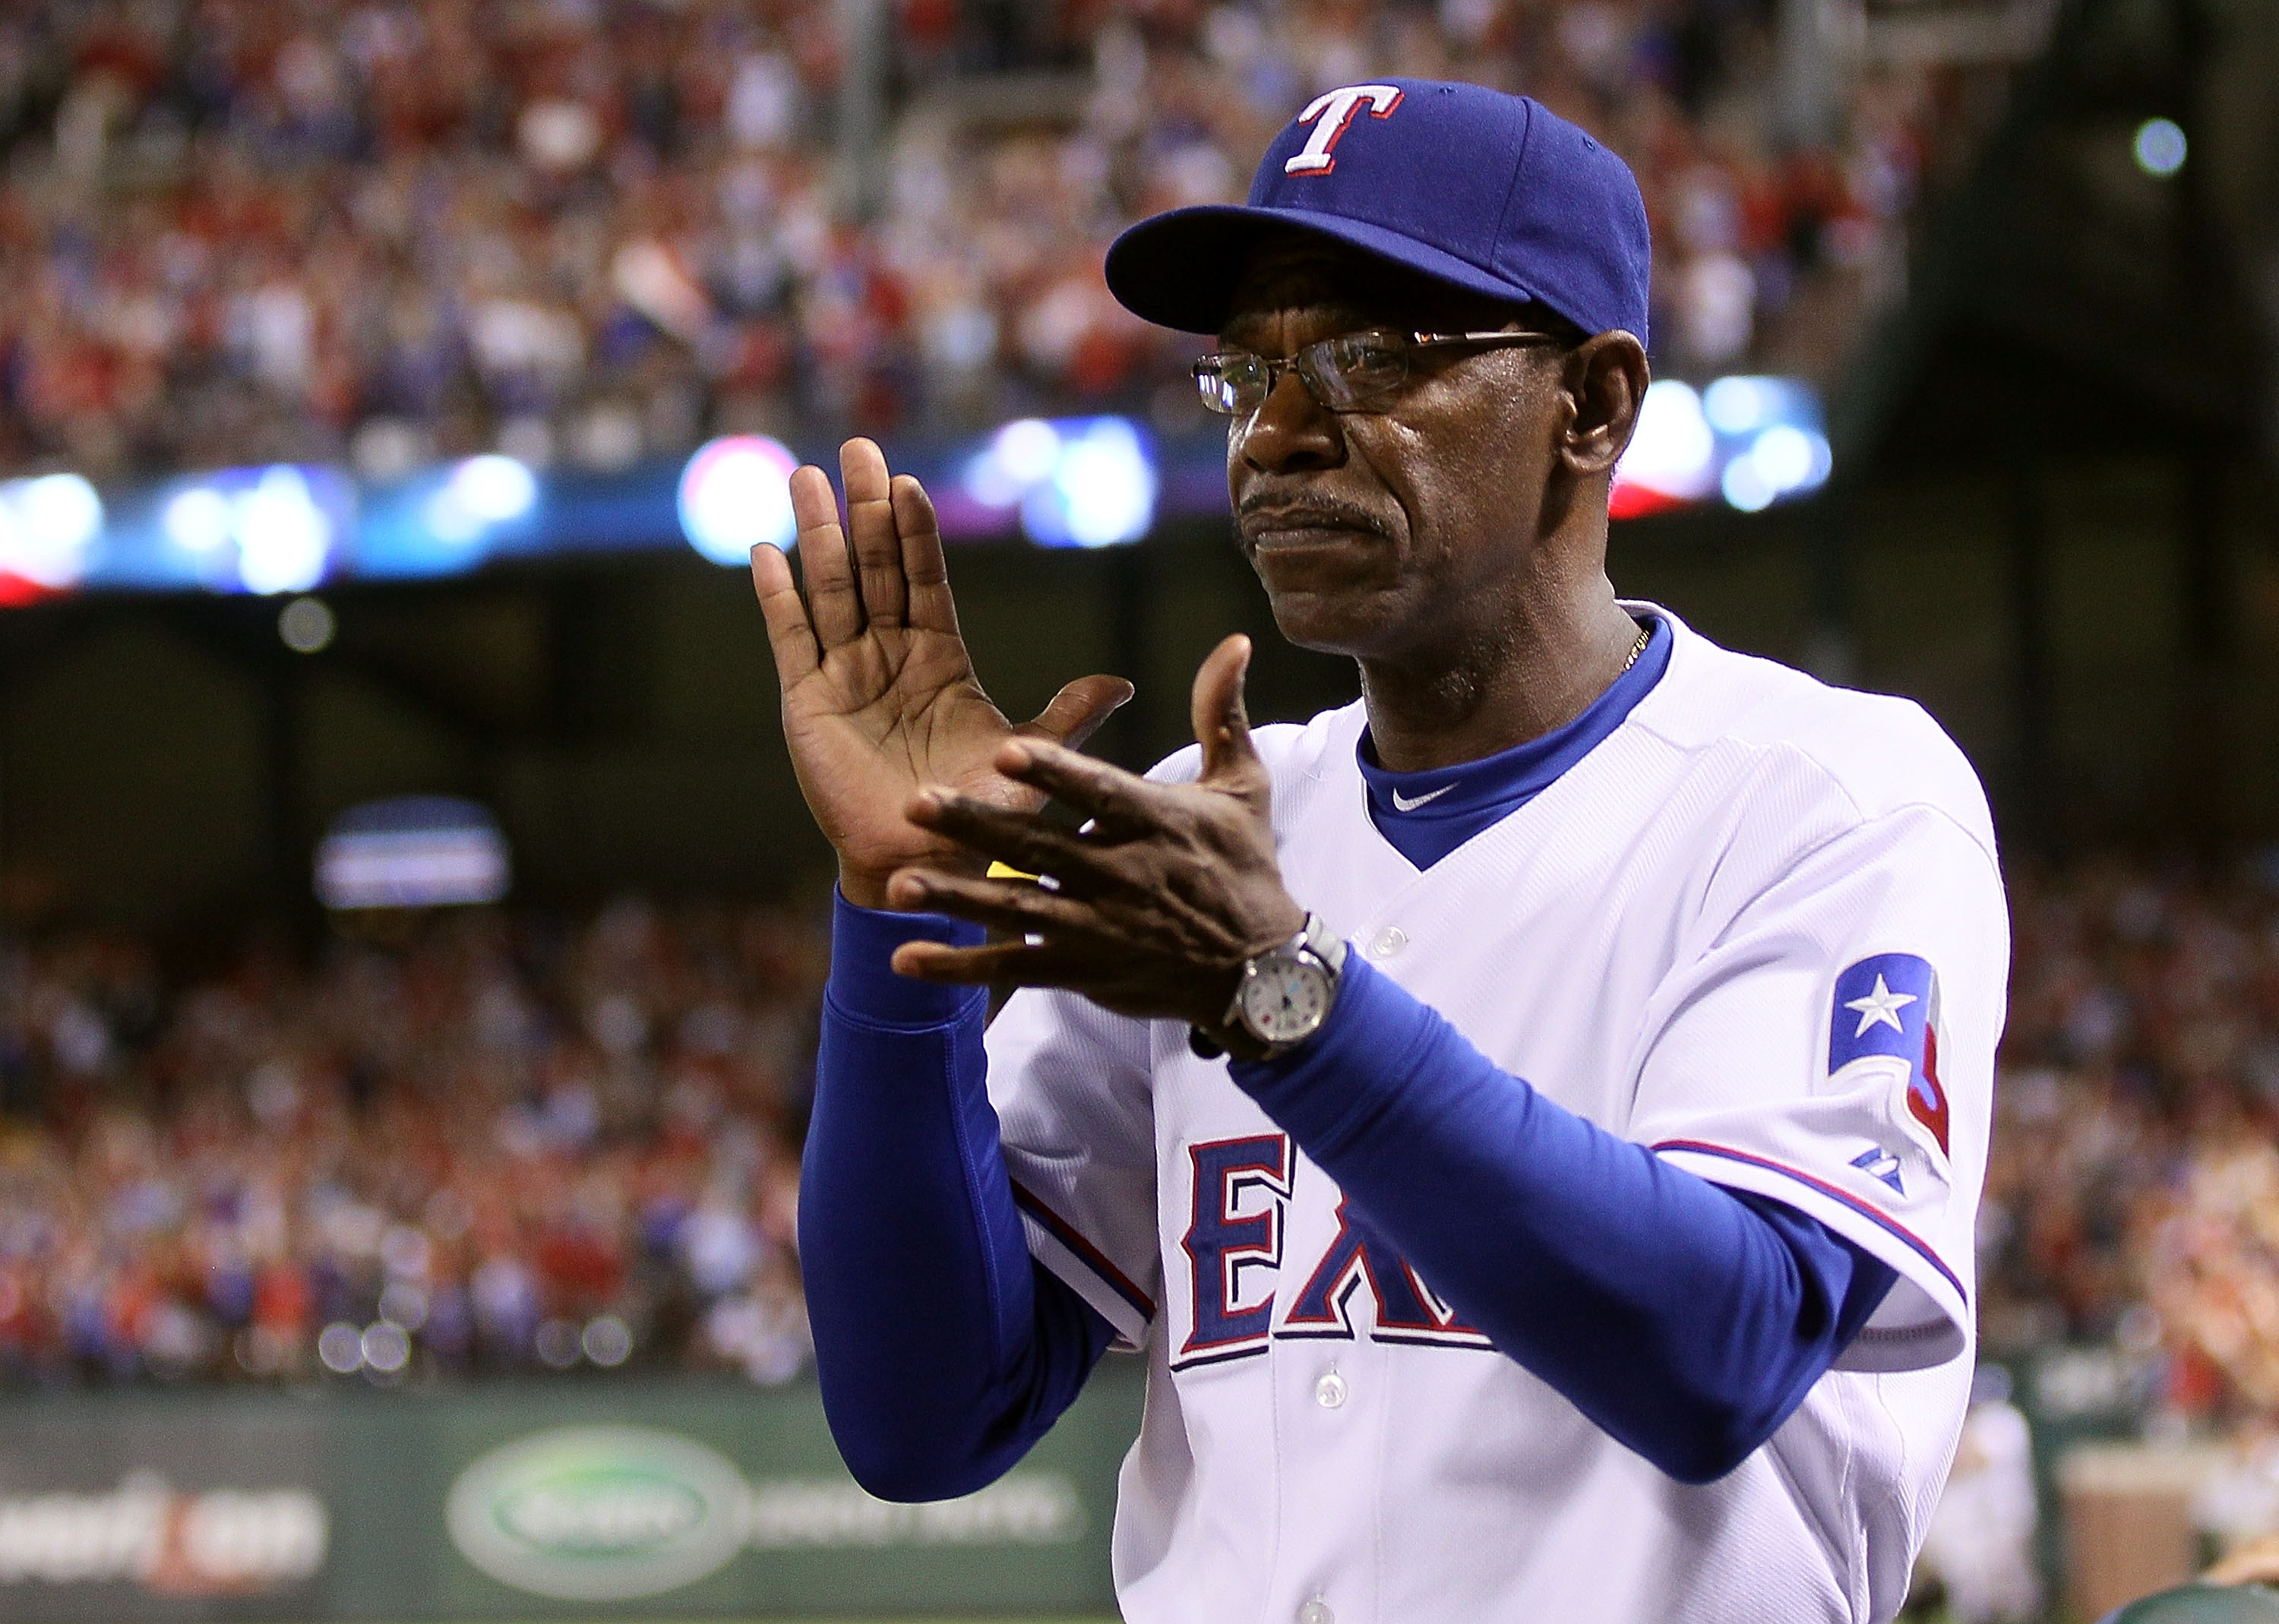 ARLINGTON, TX - OCTOBER 22:  Manager Ron Washington of the Texas Rangers claps during Game Six of the ALCS against the New York Yankees during the 2010 MLB Playoffs at Rangers Ballpark in Arlington on October 22, 2010 in Arlington, Texas.  (Photo by Elsa/